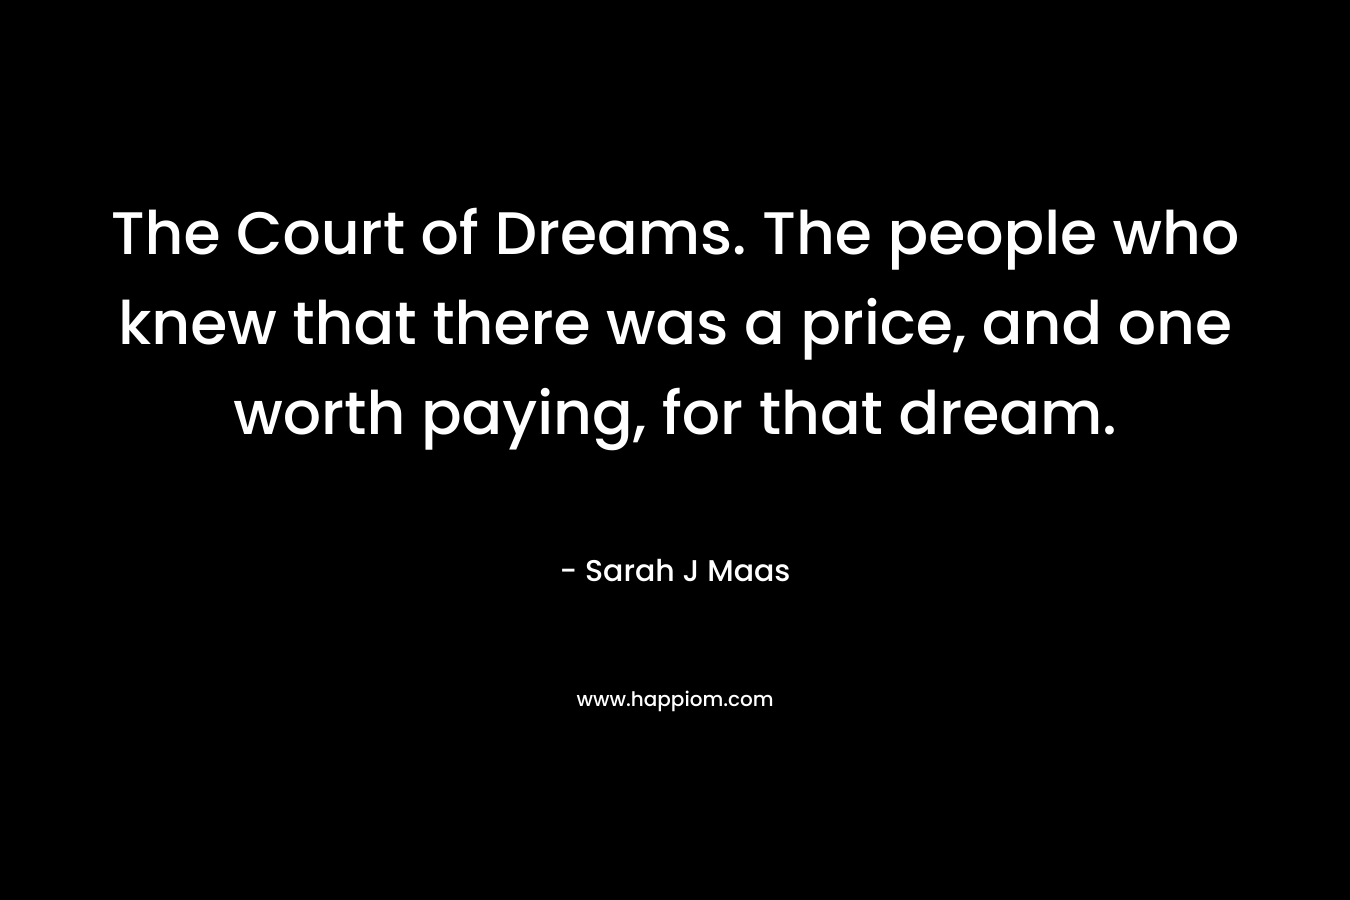 The Court of Dreams. The people who knew that there was a price, and one worth paying, for that dream.